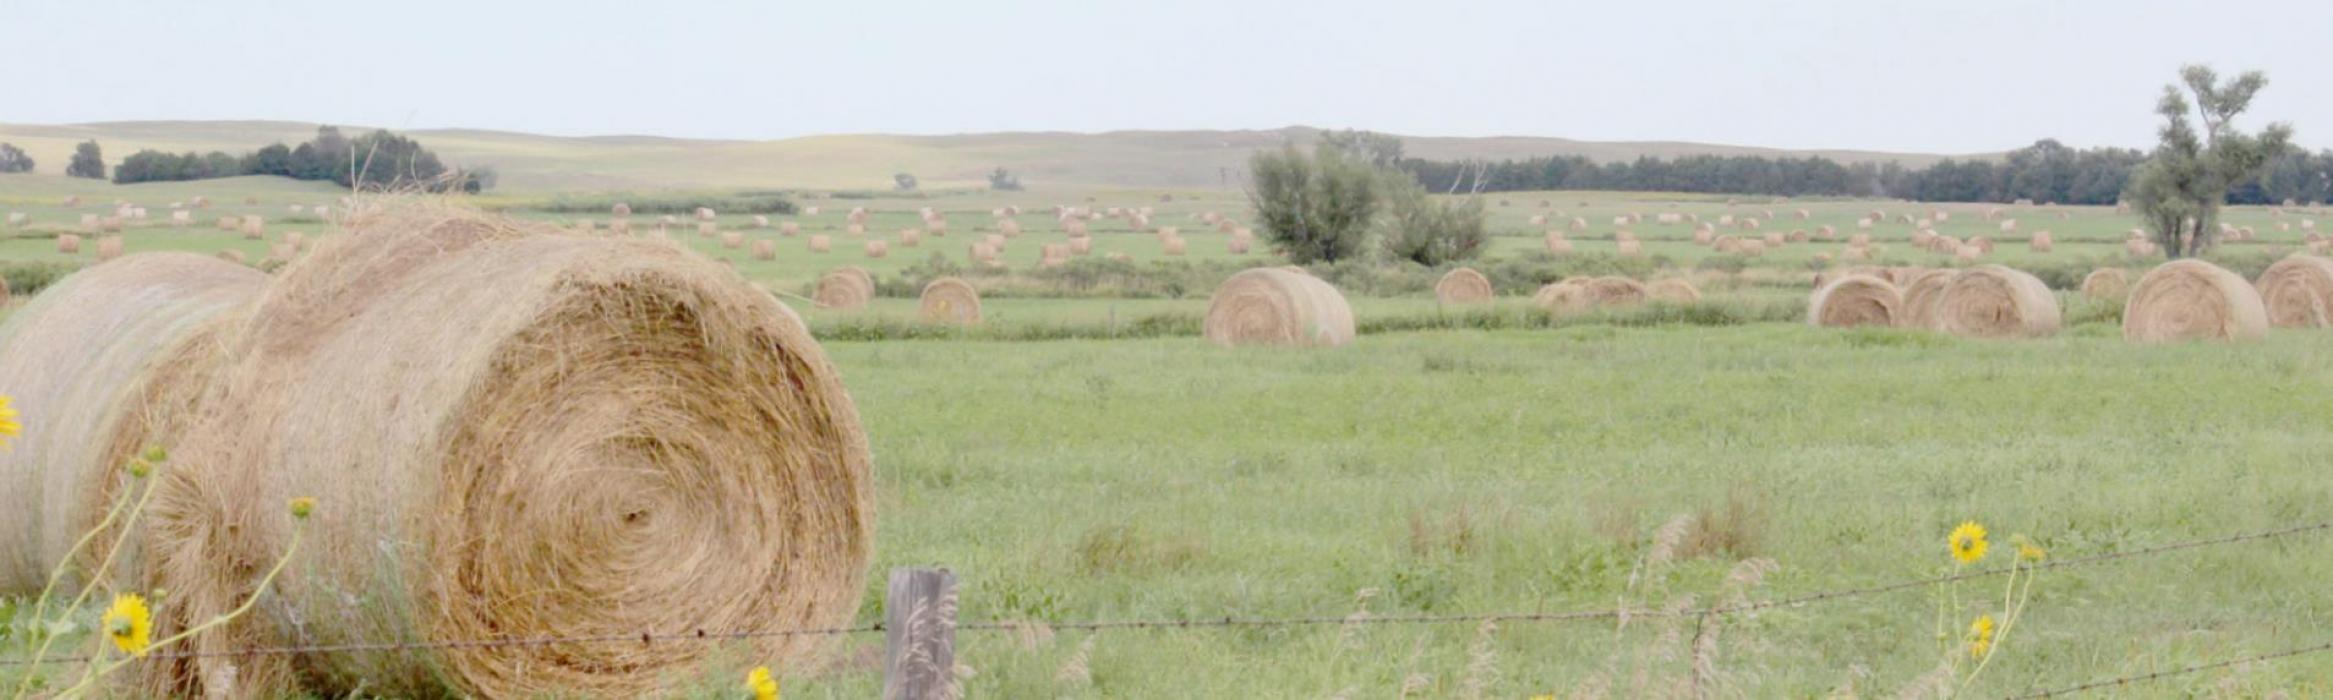 Nebraska is ranked third nationally in all hay production, producing a total of 6,289,000 tons last year. These southern Brown County bales were photographed in August 2016.